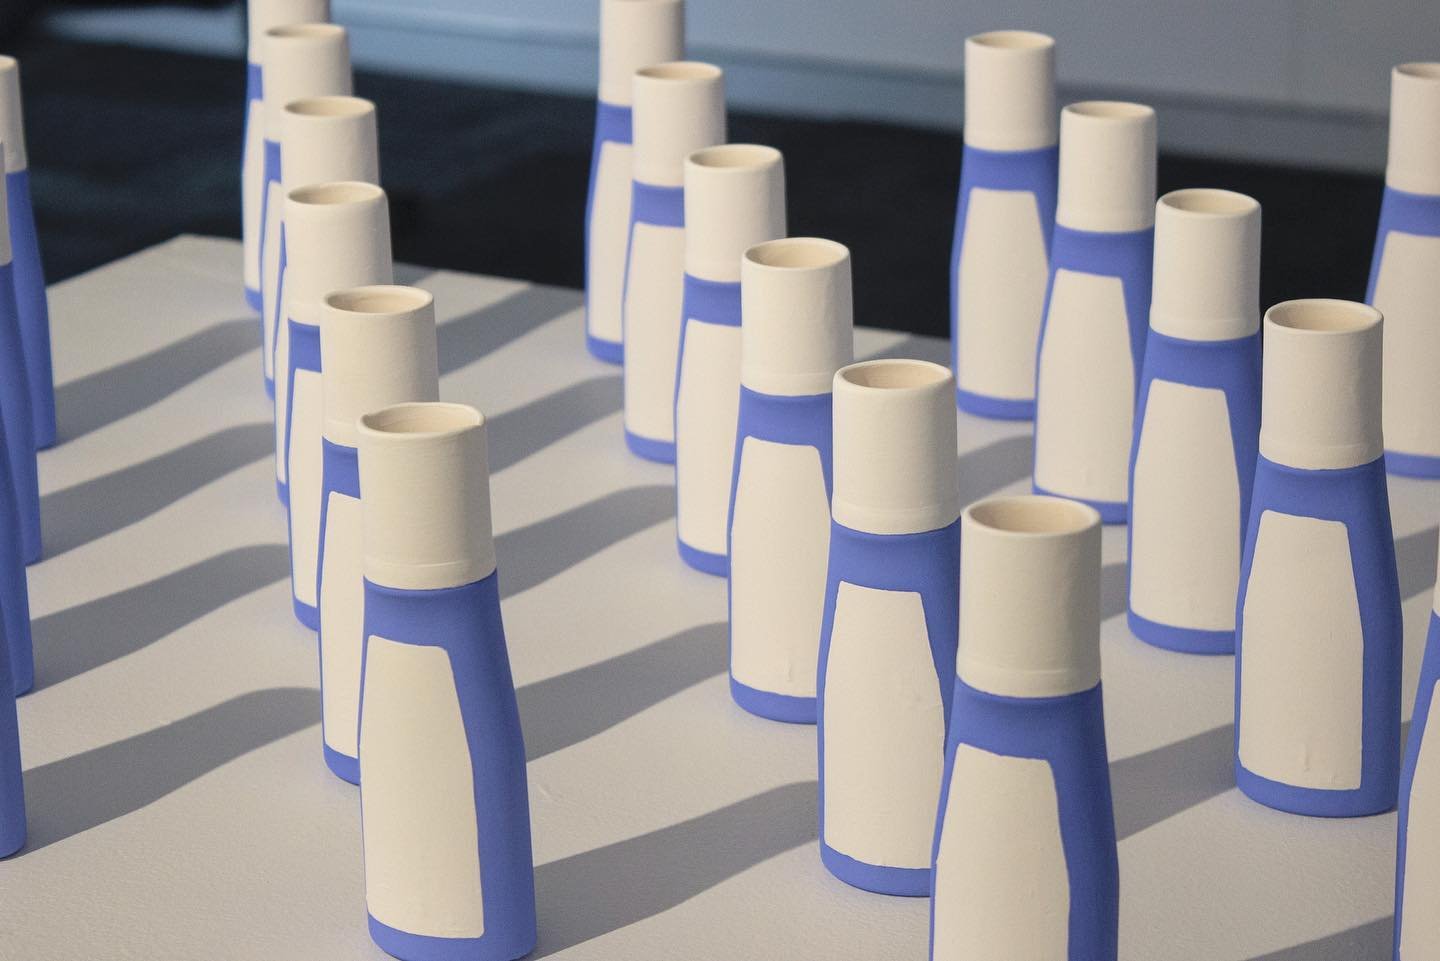 Stockpile
2023
Unglazed ceramic T gel bottles

Exhibited at our graduate exhibition earlier this year.

#transart #tgel #tgelcollection #ceramics